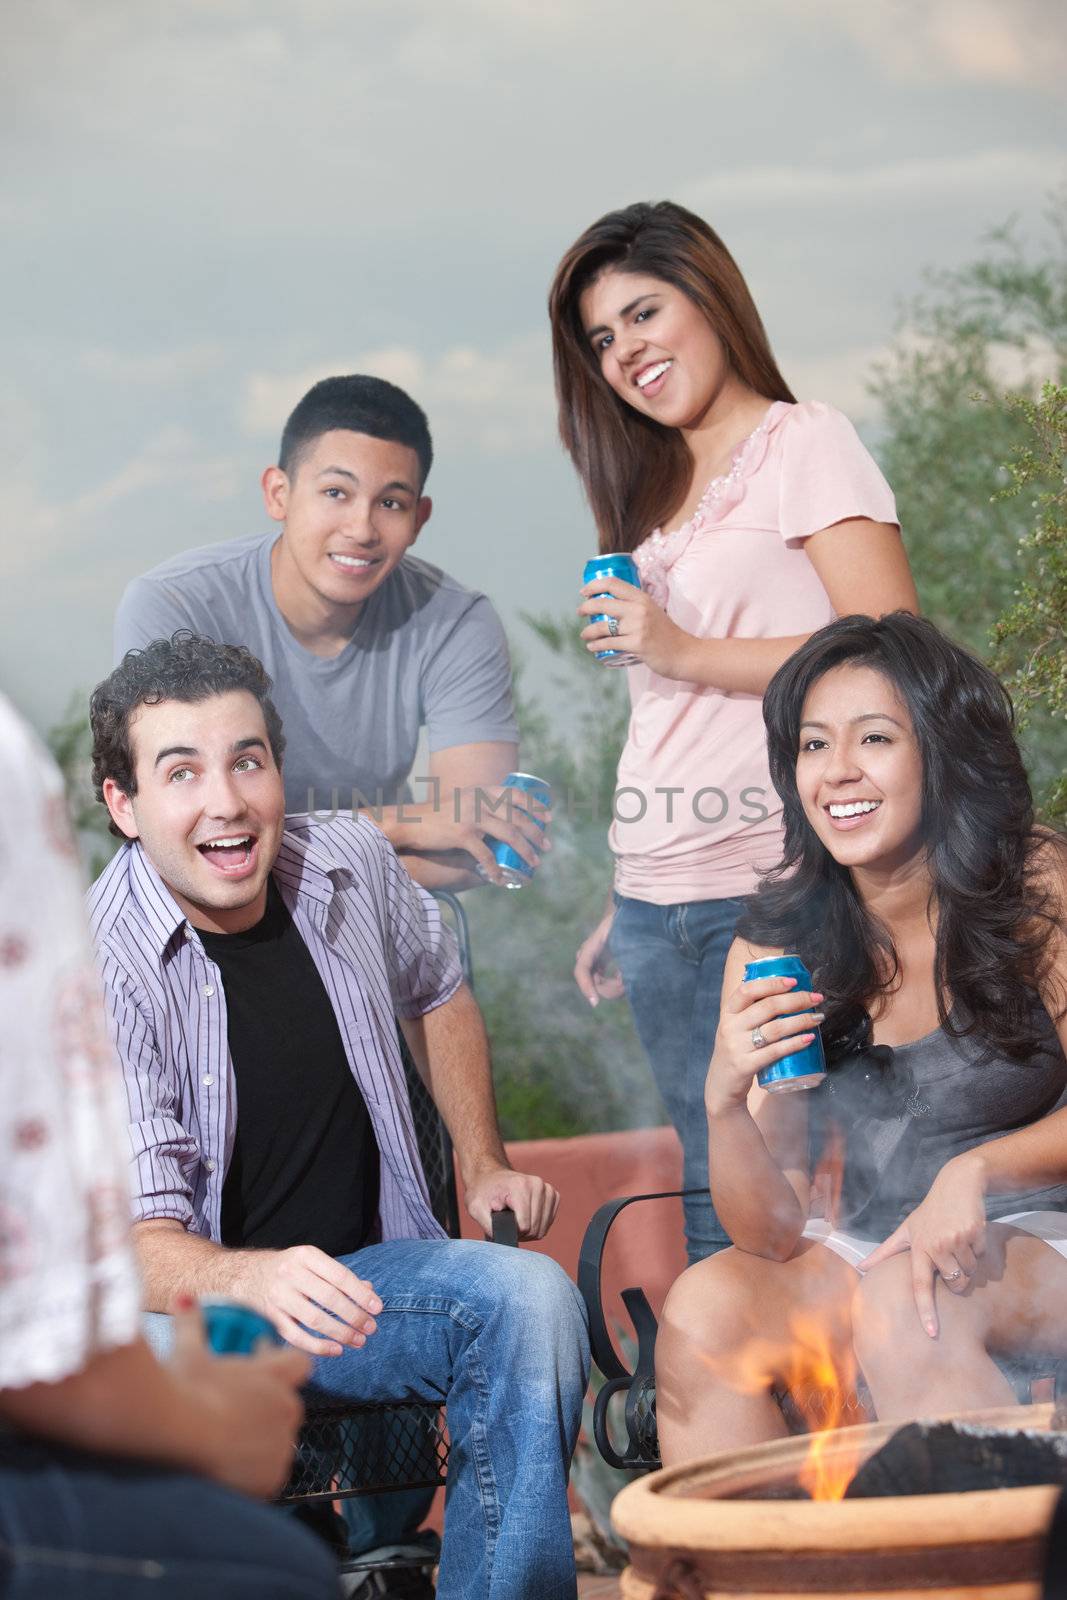 Group of teens hanging out at a barbecue drinking soda